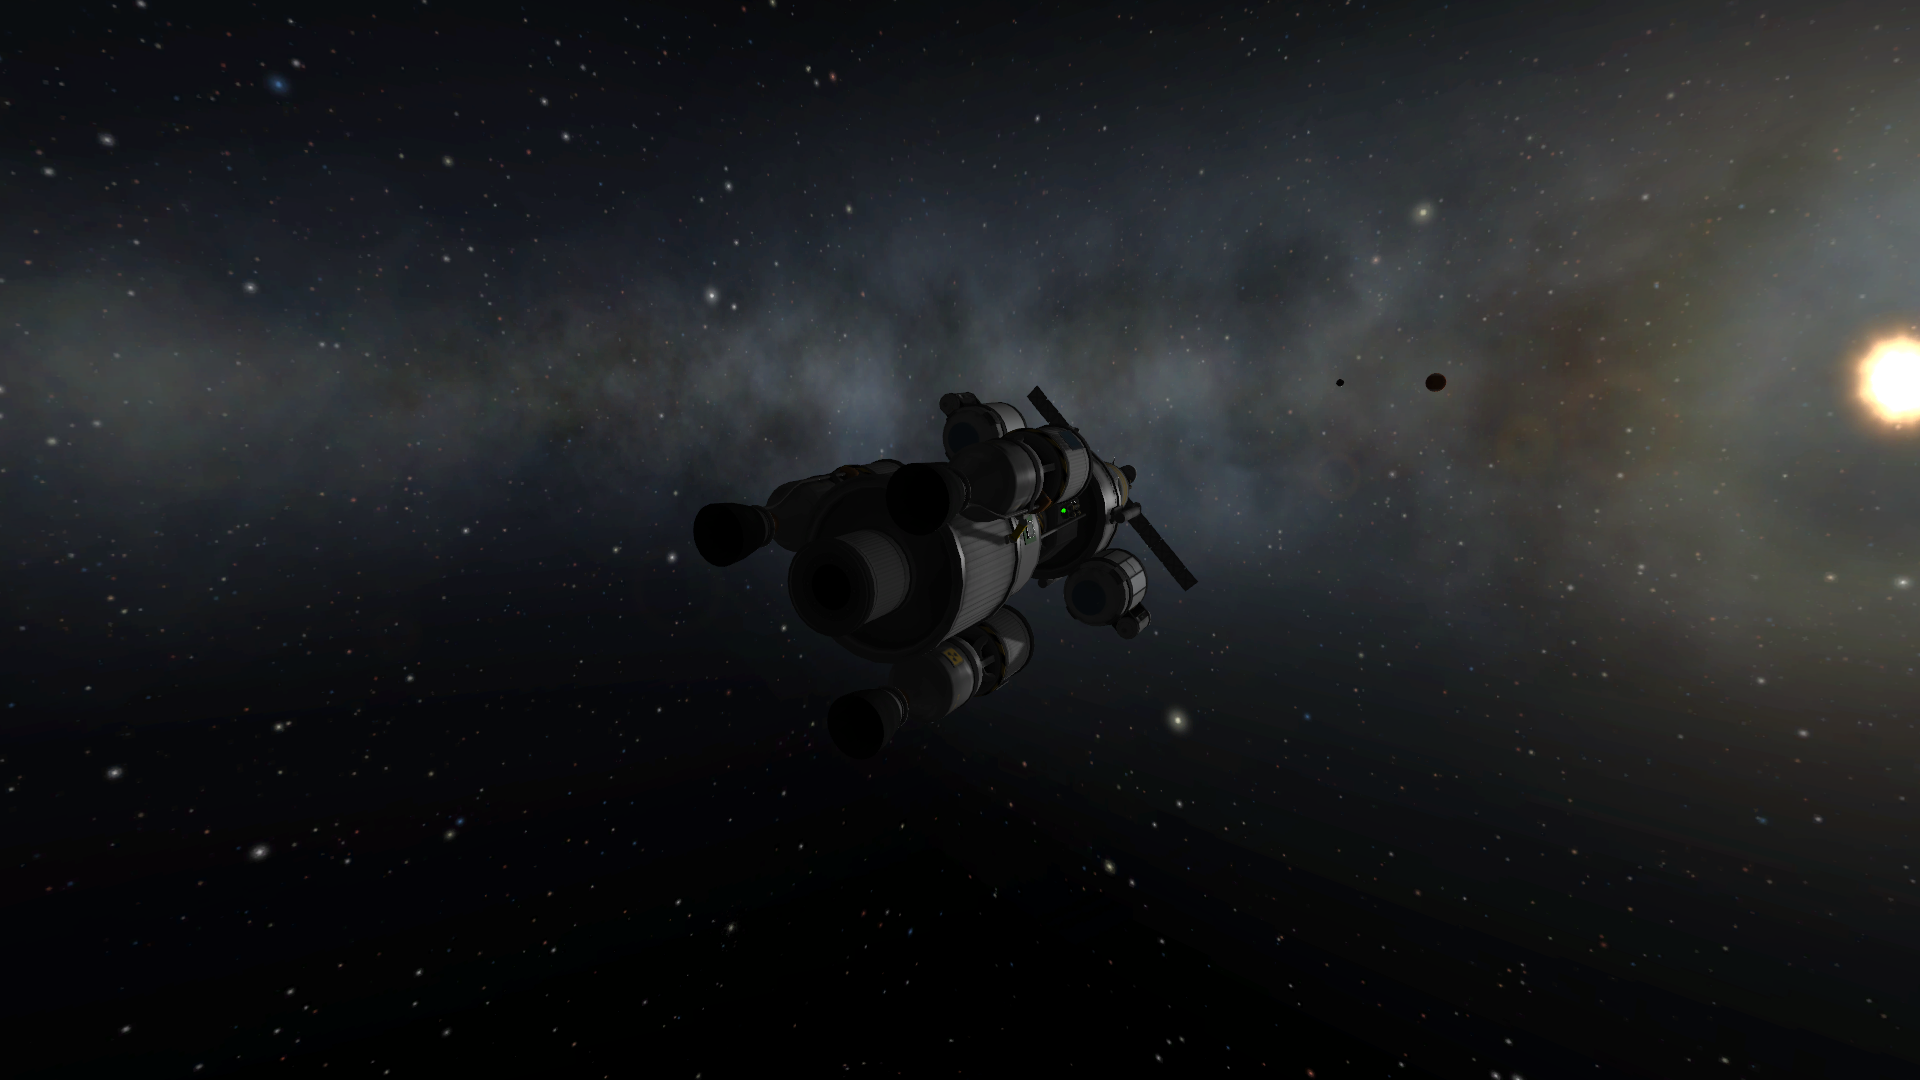 ambition entering duna's sphere of influence